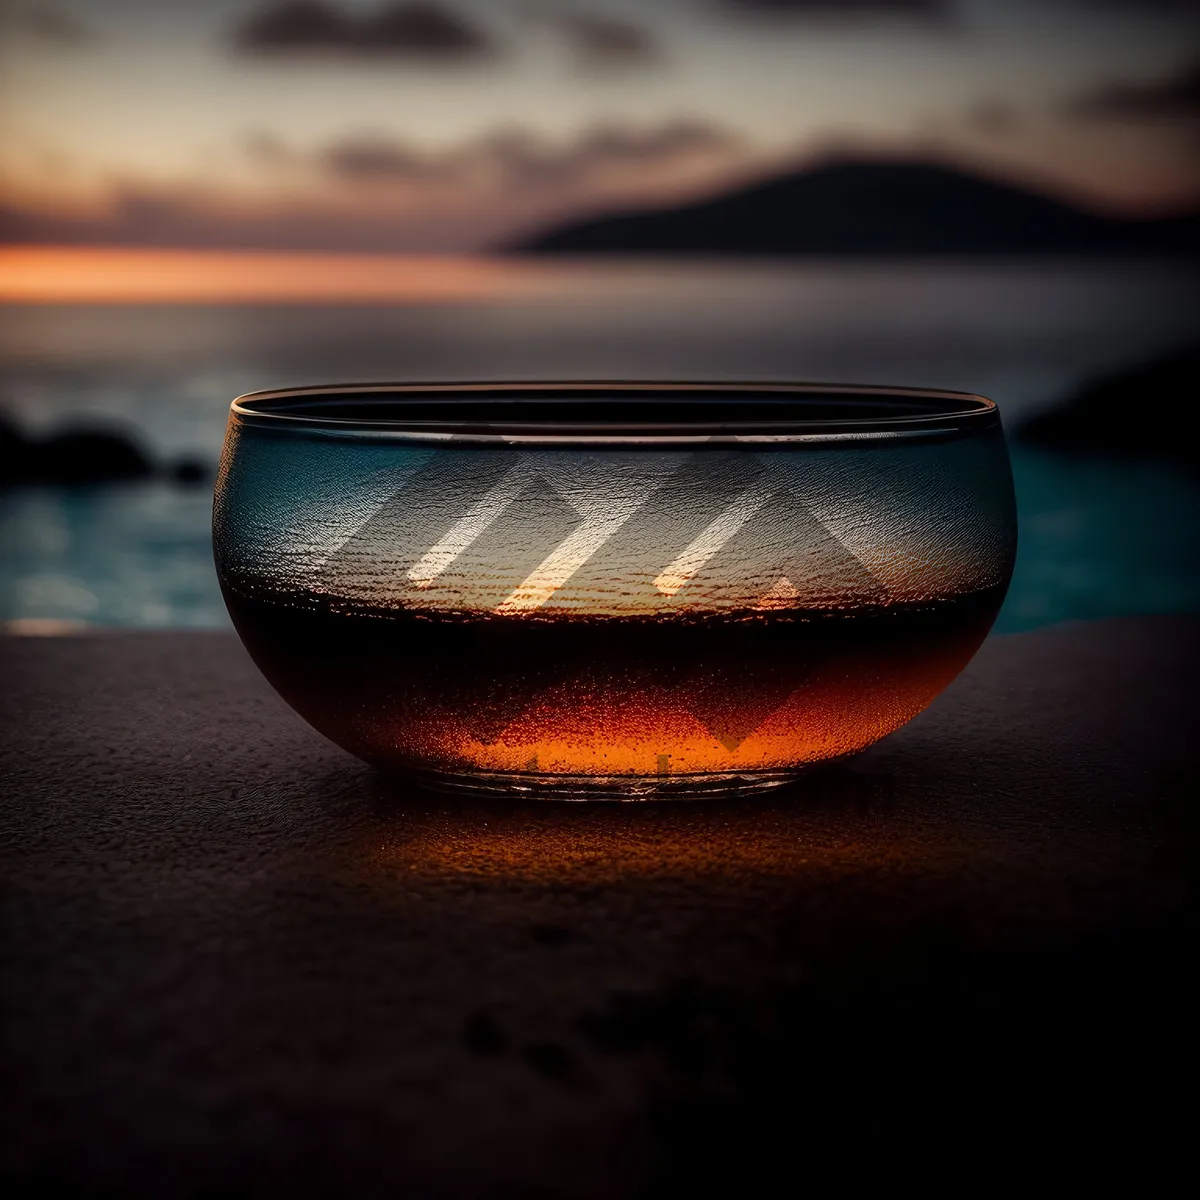 Picture of Hot Bowl of Soup in Glass Vessel